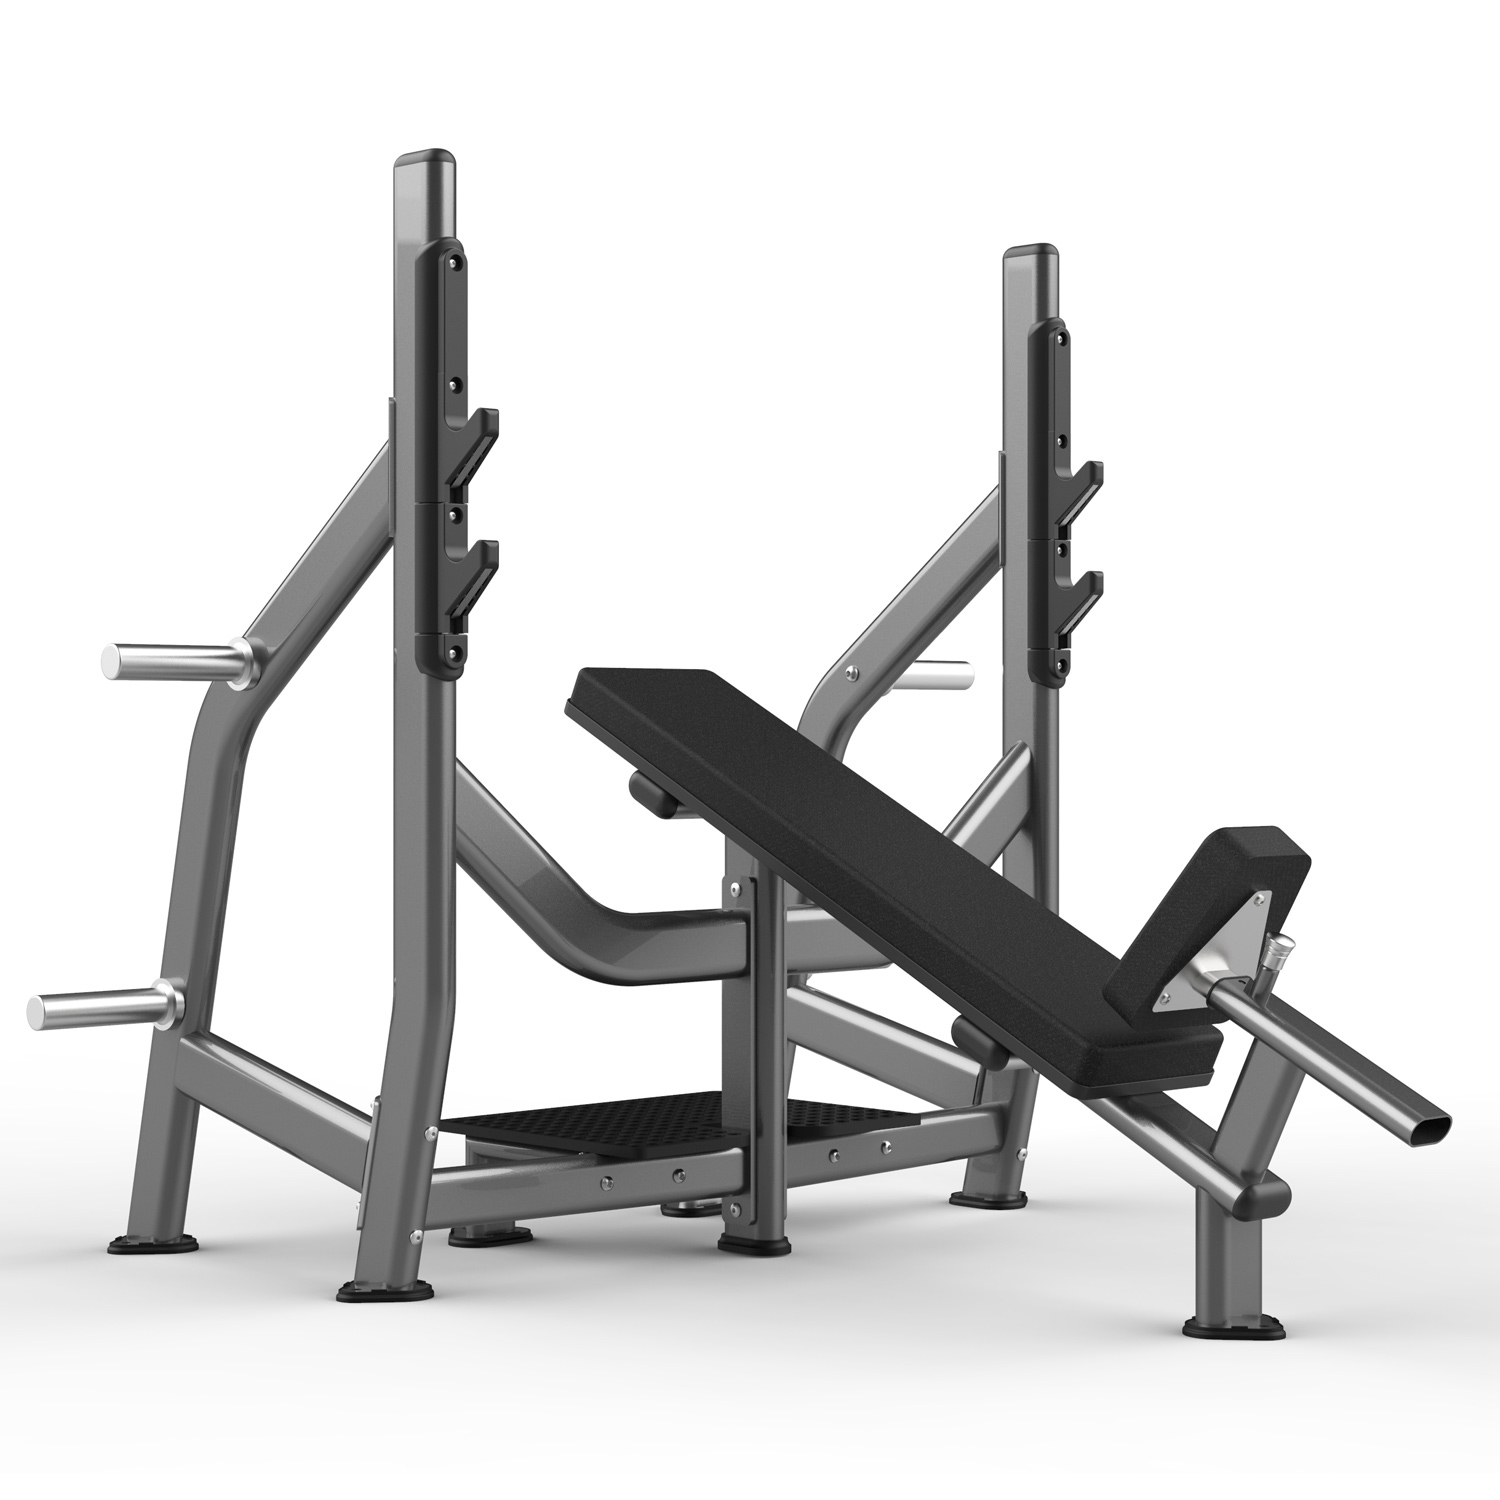 Gym Bench And Weights FW-1002 Olympic Incline Press